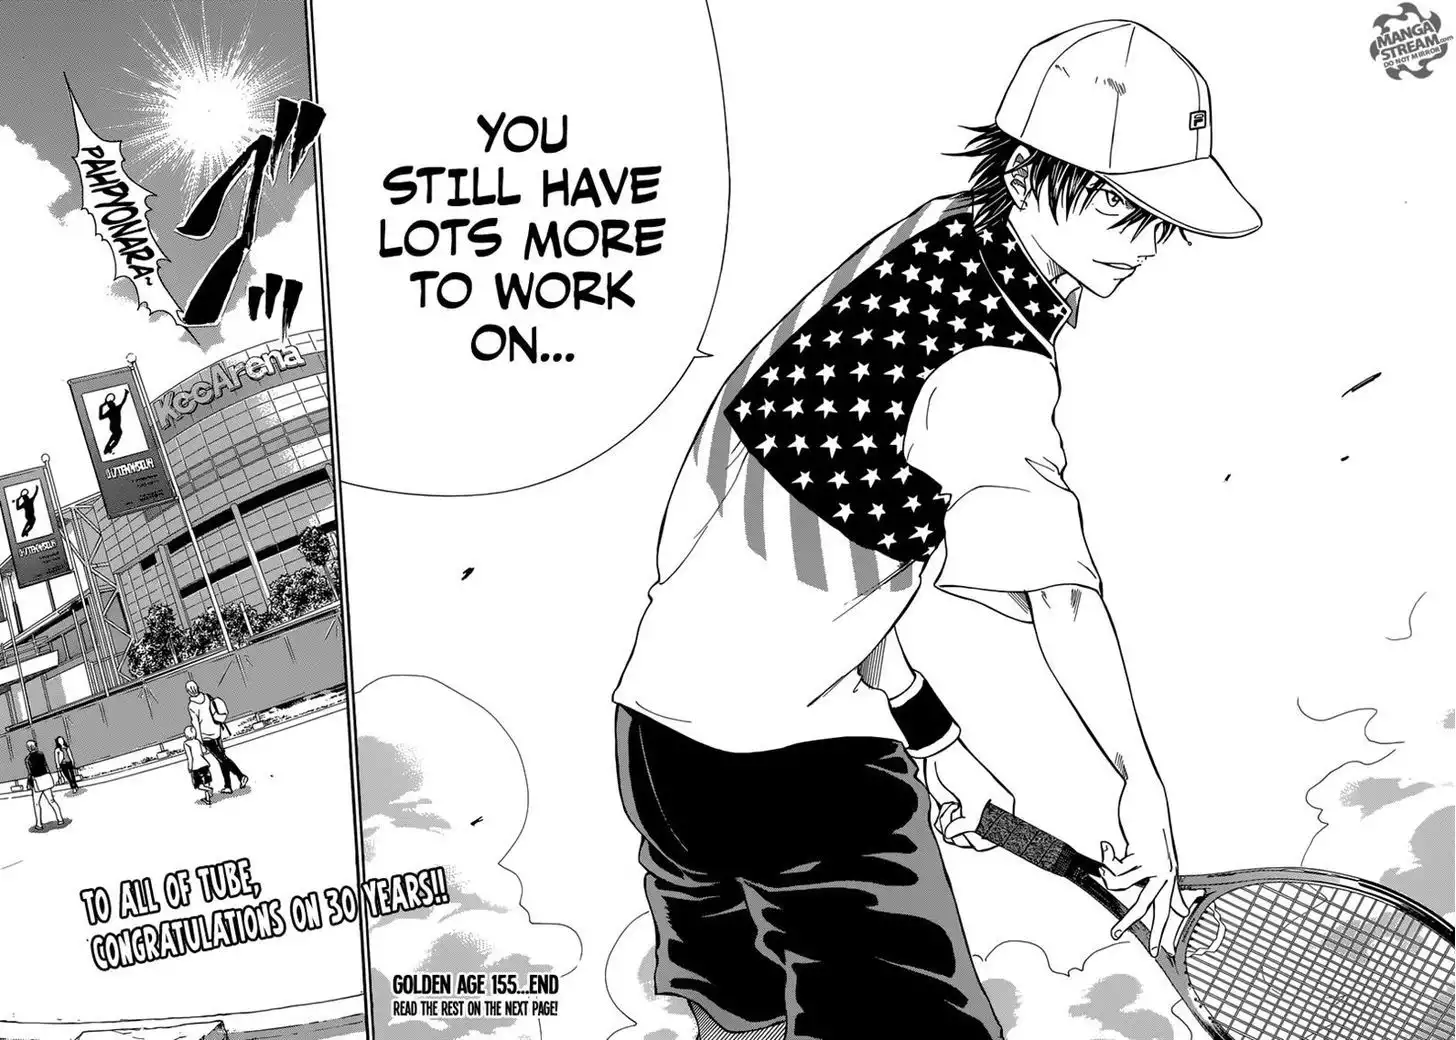 New Prince of Tennis Chapter 155